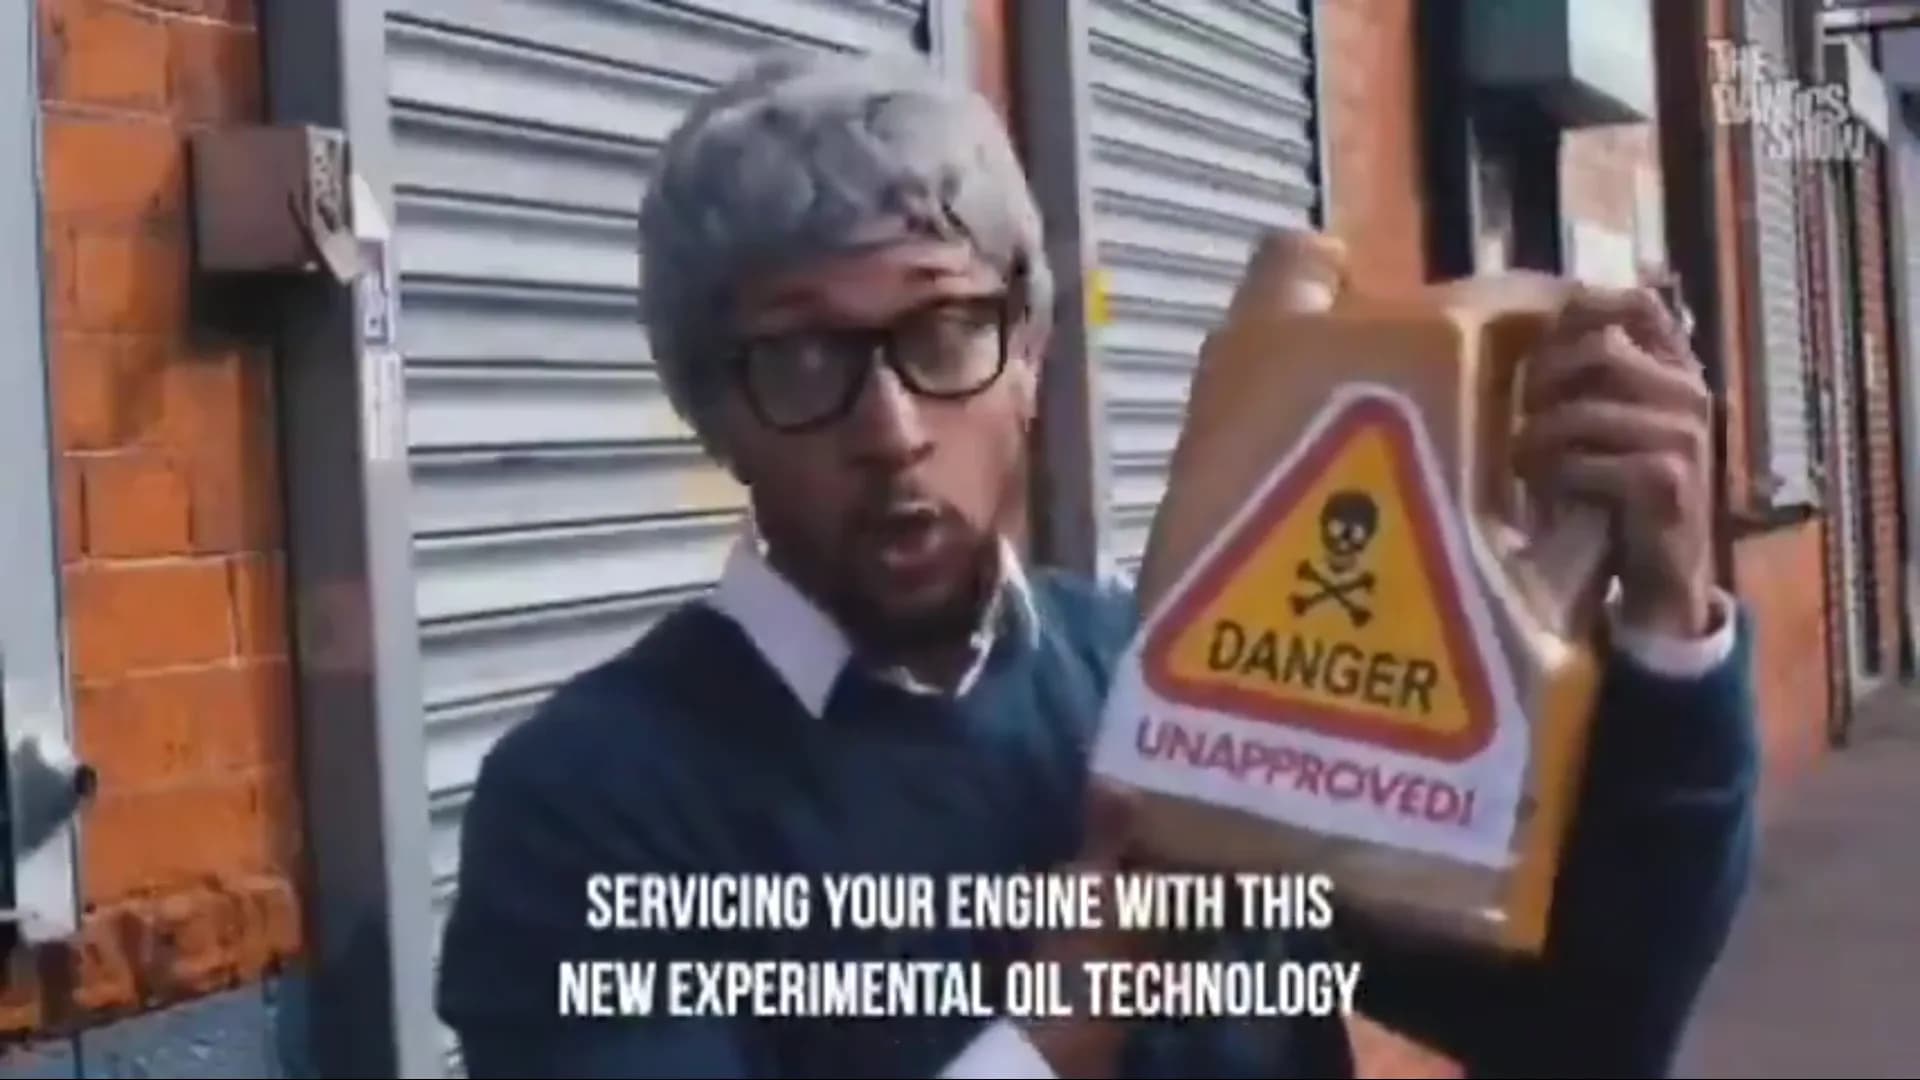 Satire: New unapproved experimental motor oil technology - try it!